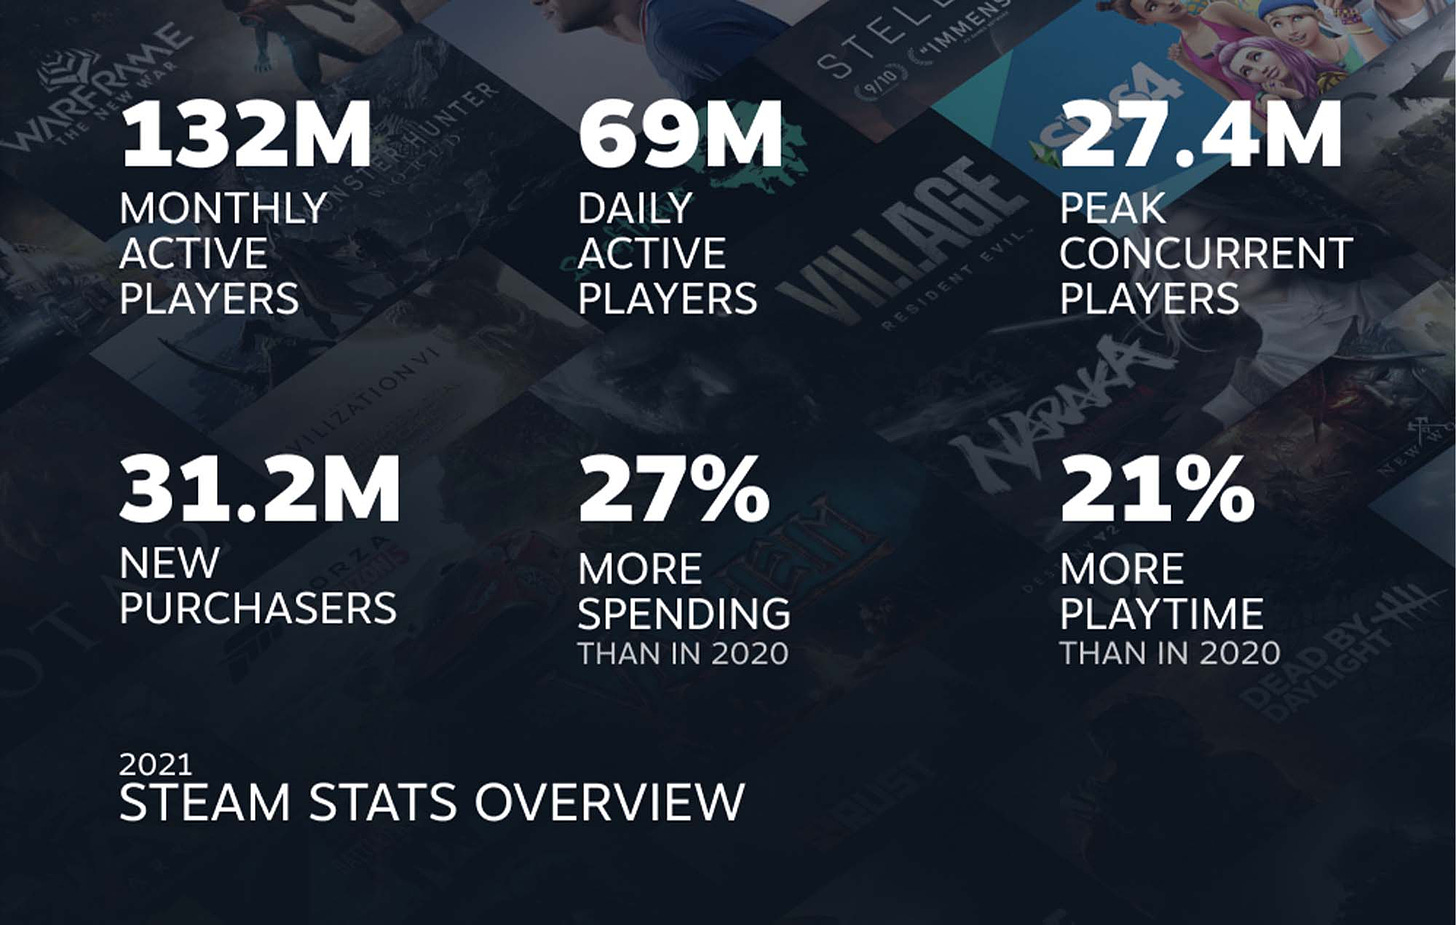 Steam year-end stats reveal people are playing more games than ever